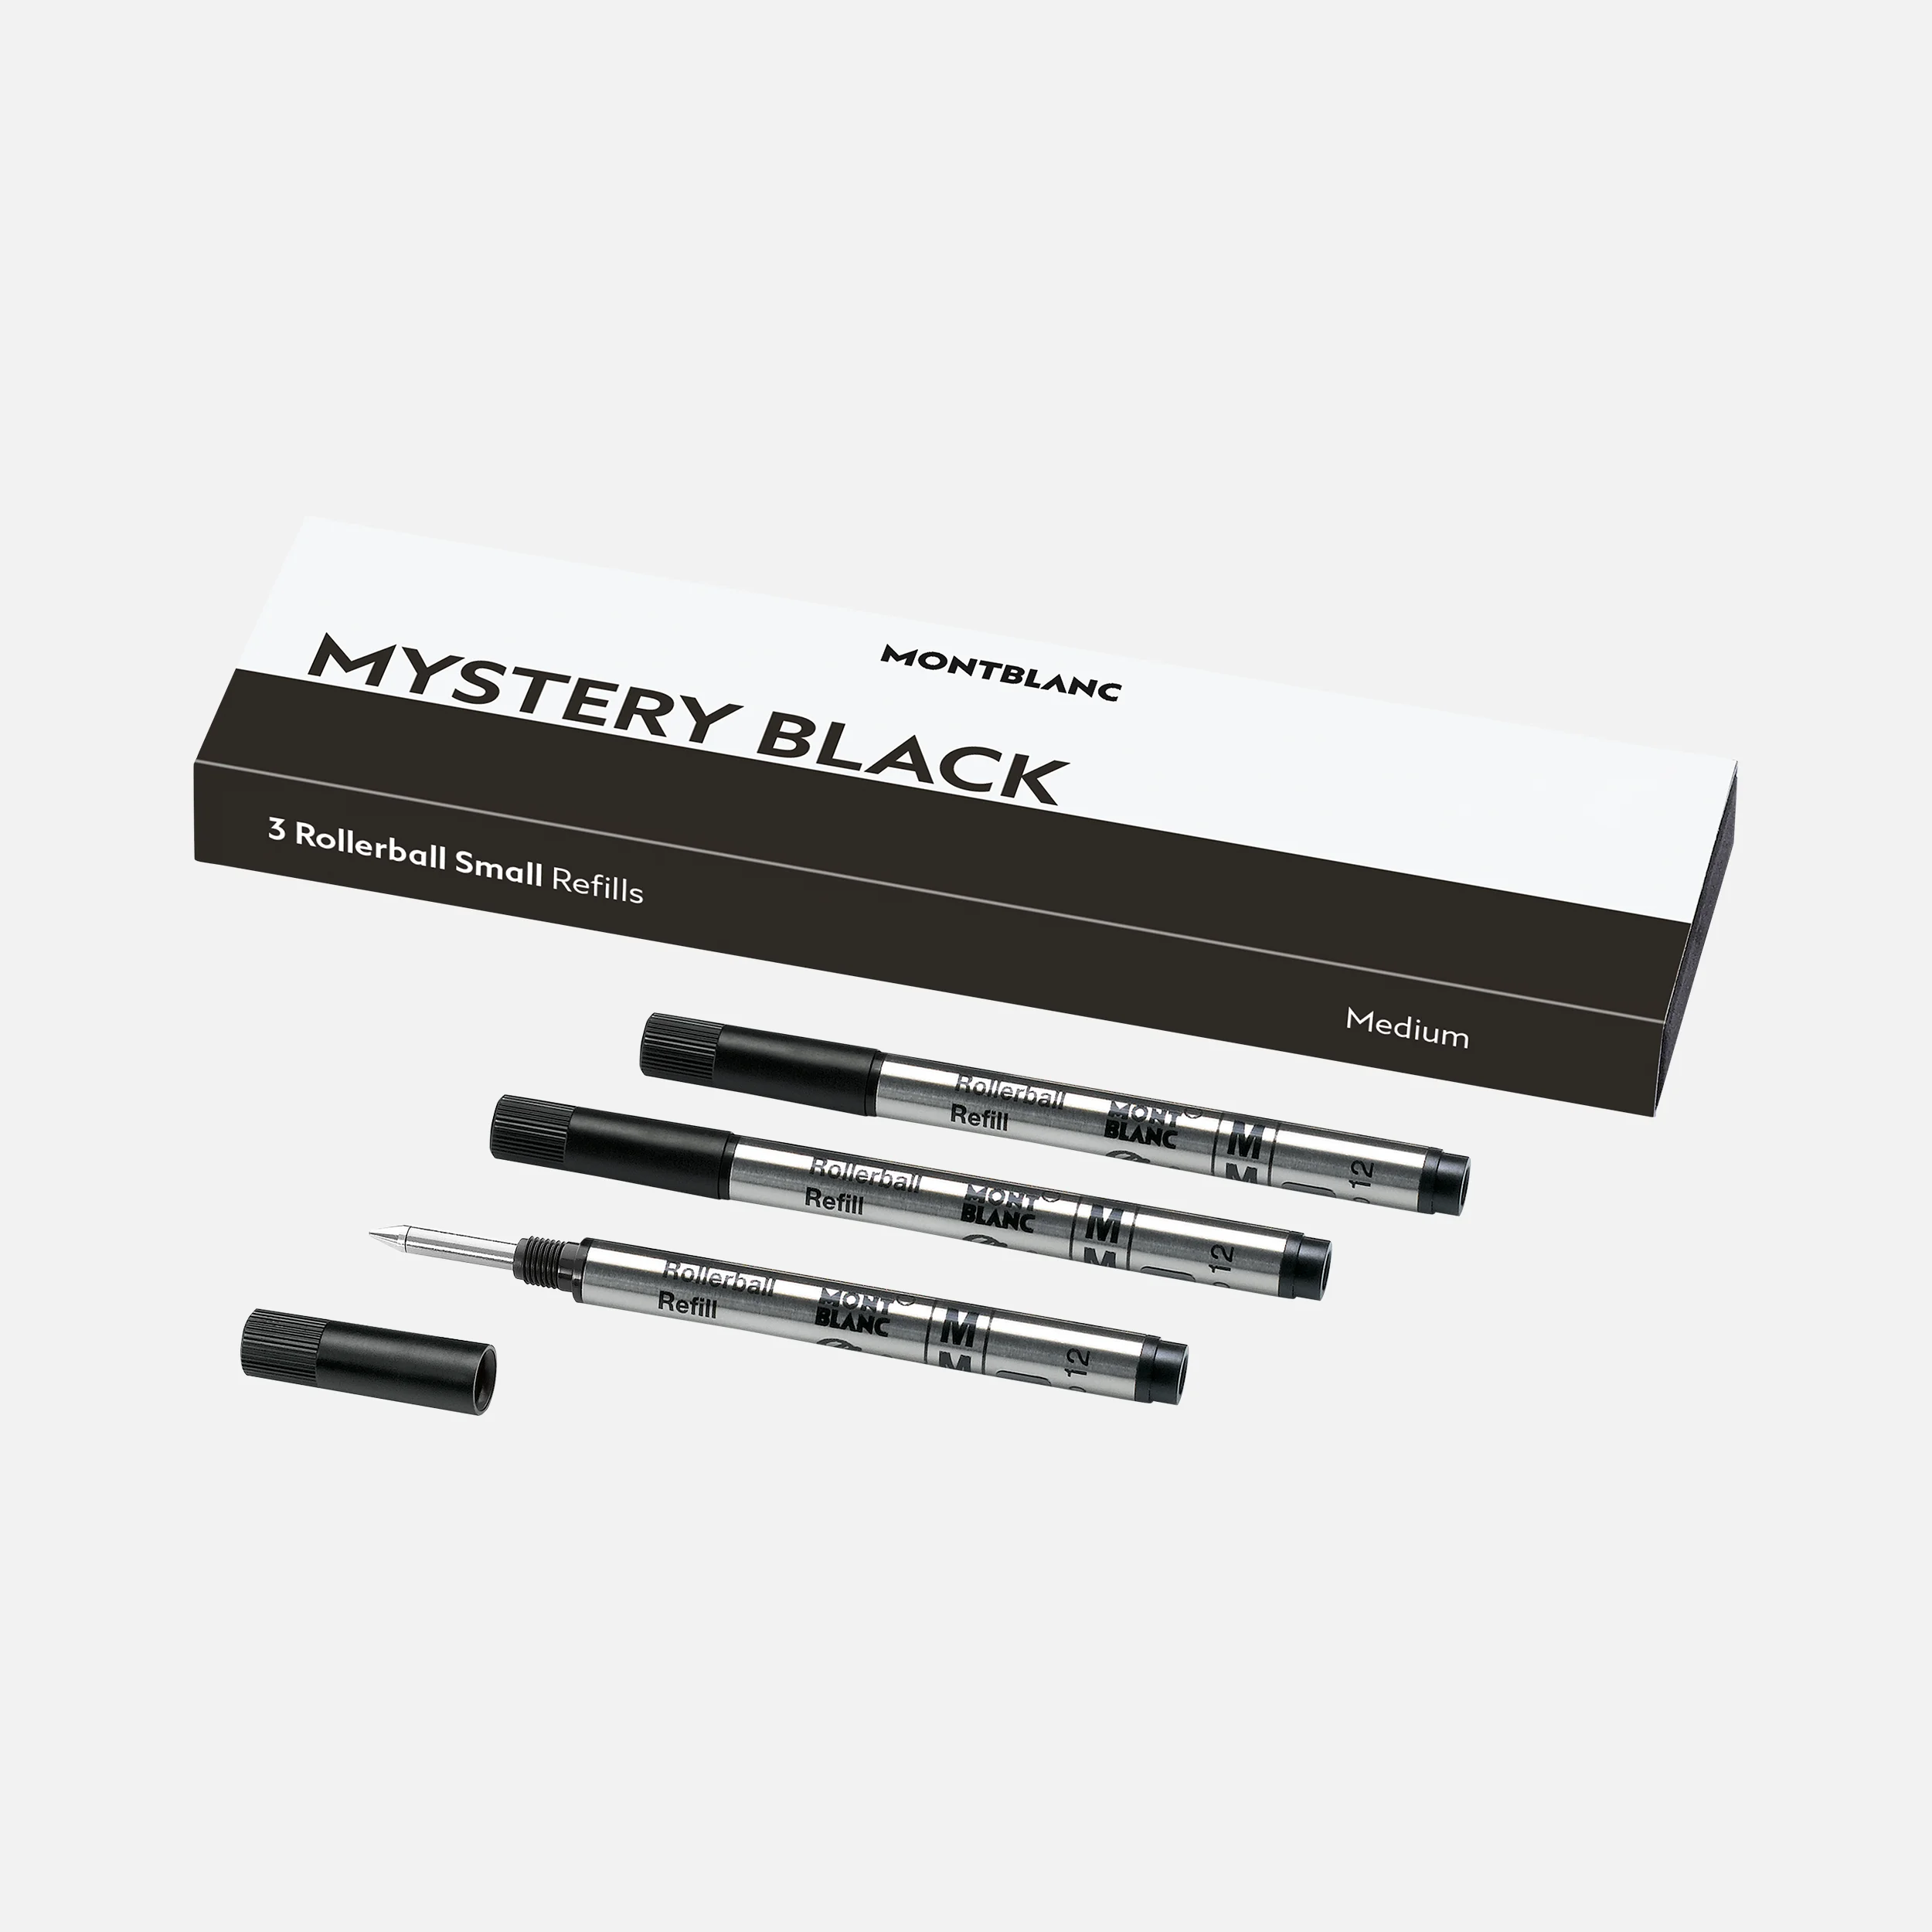 Montblanc Refill Small Rollerball Mystery Black Medium (3pk) - Pencraft the boutique